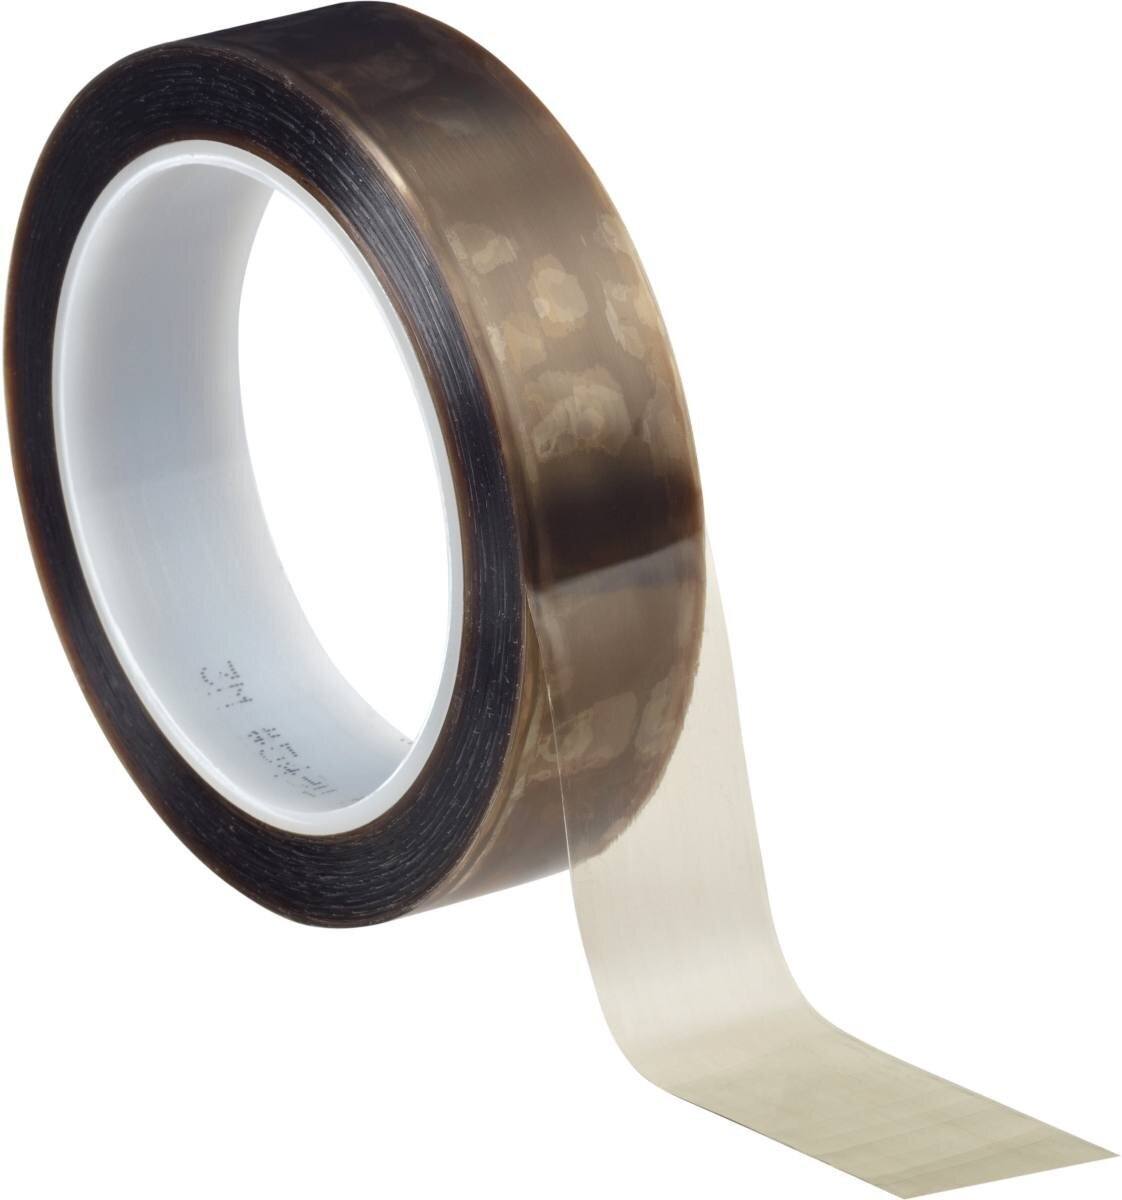 3M 5491 PTFE extruded film adhesive tape 19mmx33m, 0.17mm, silicone